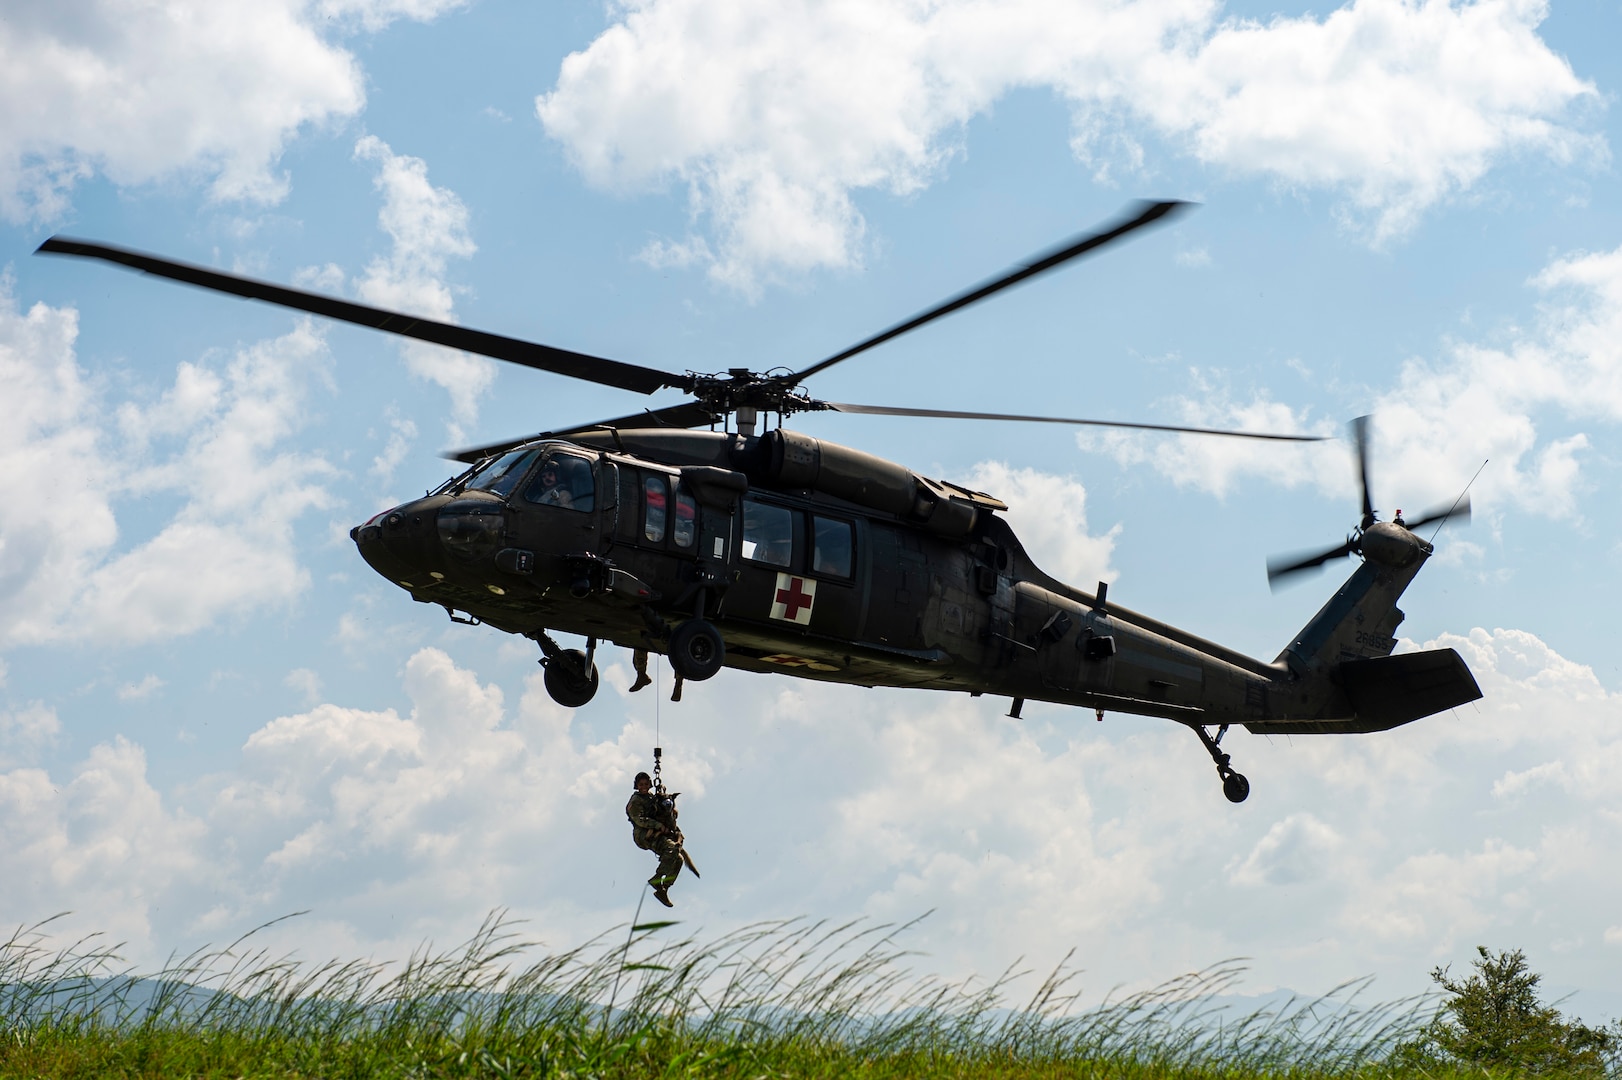 U.S. Army Spc. Kayla Garcia and military working dog (MWD) Zoli are hoisted from a UH-60 Blackhawk from the 1st Battalion, 228th Aviation Regiment Charlie Company, during a MWD hoist training exercise at Soto Cano Air Base, Honduras, Oct. 29, 2021.